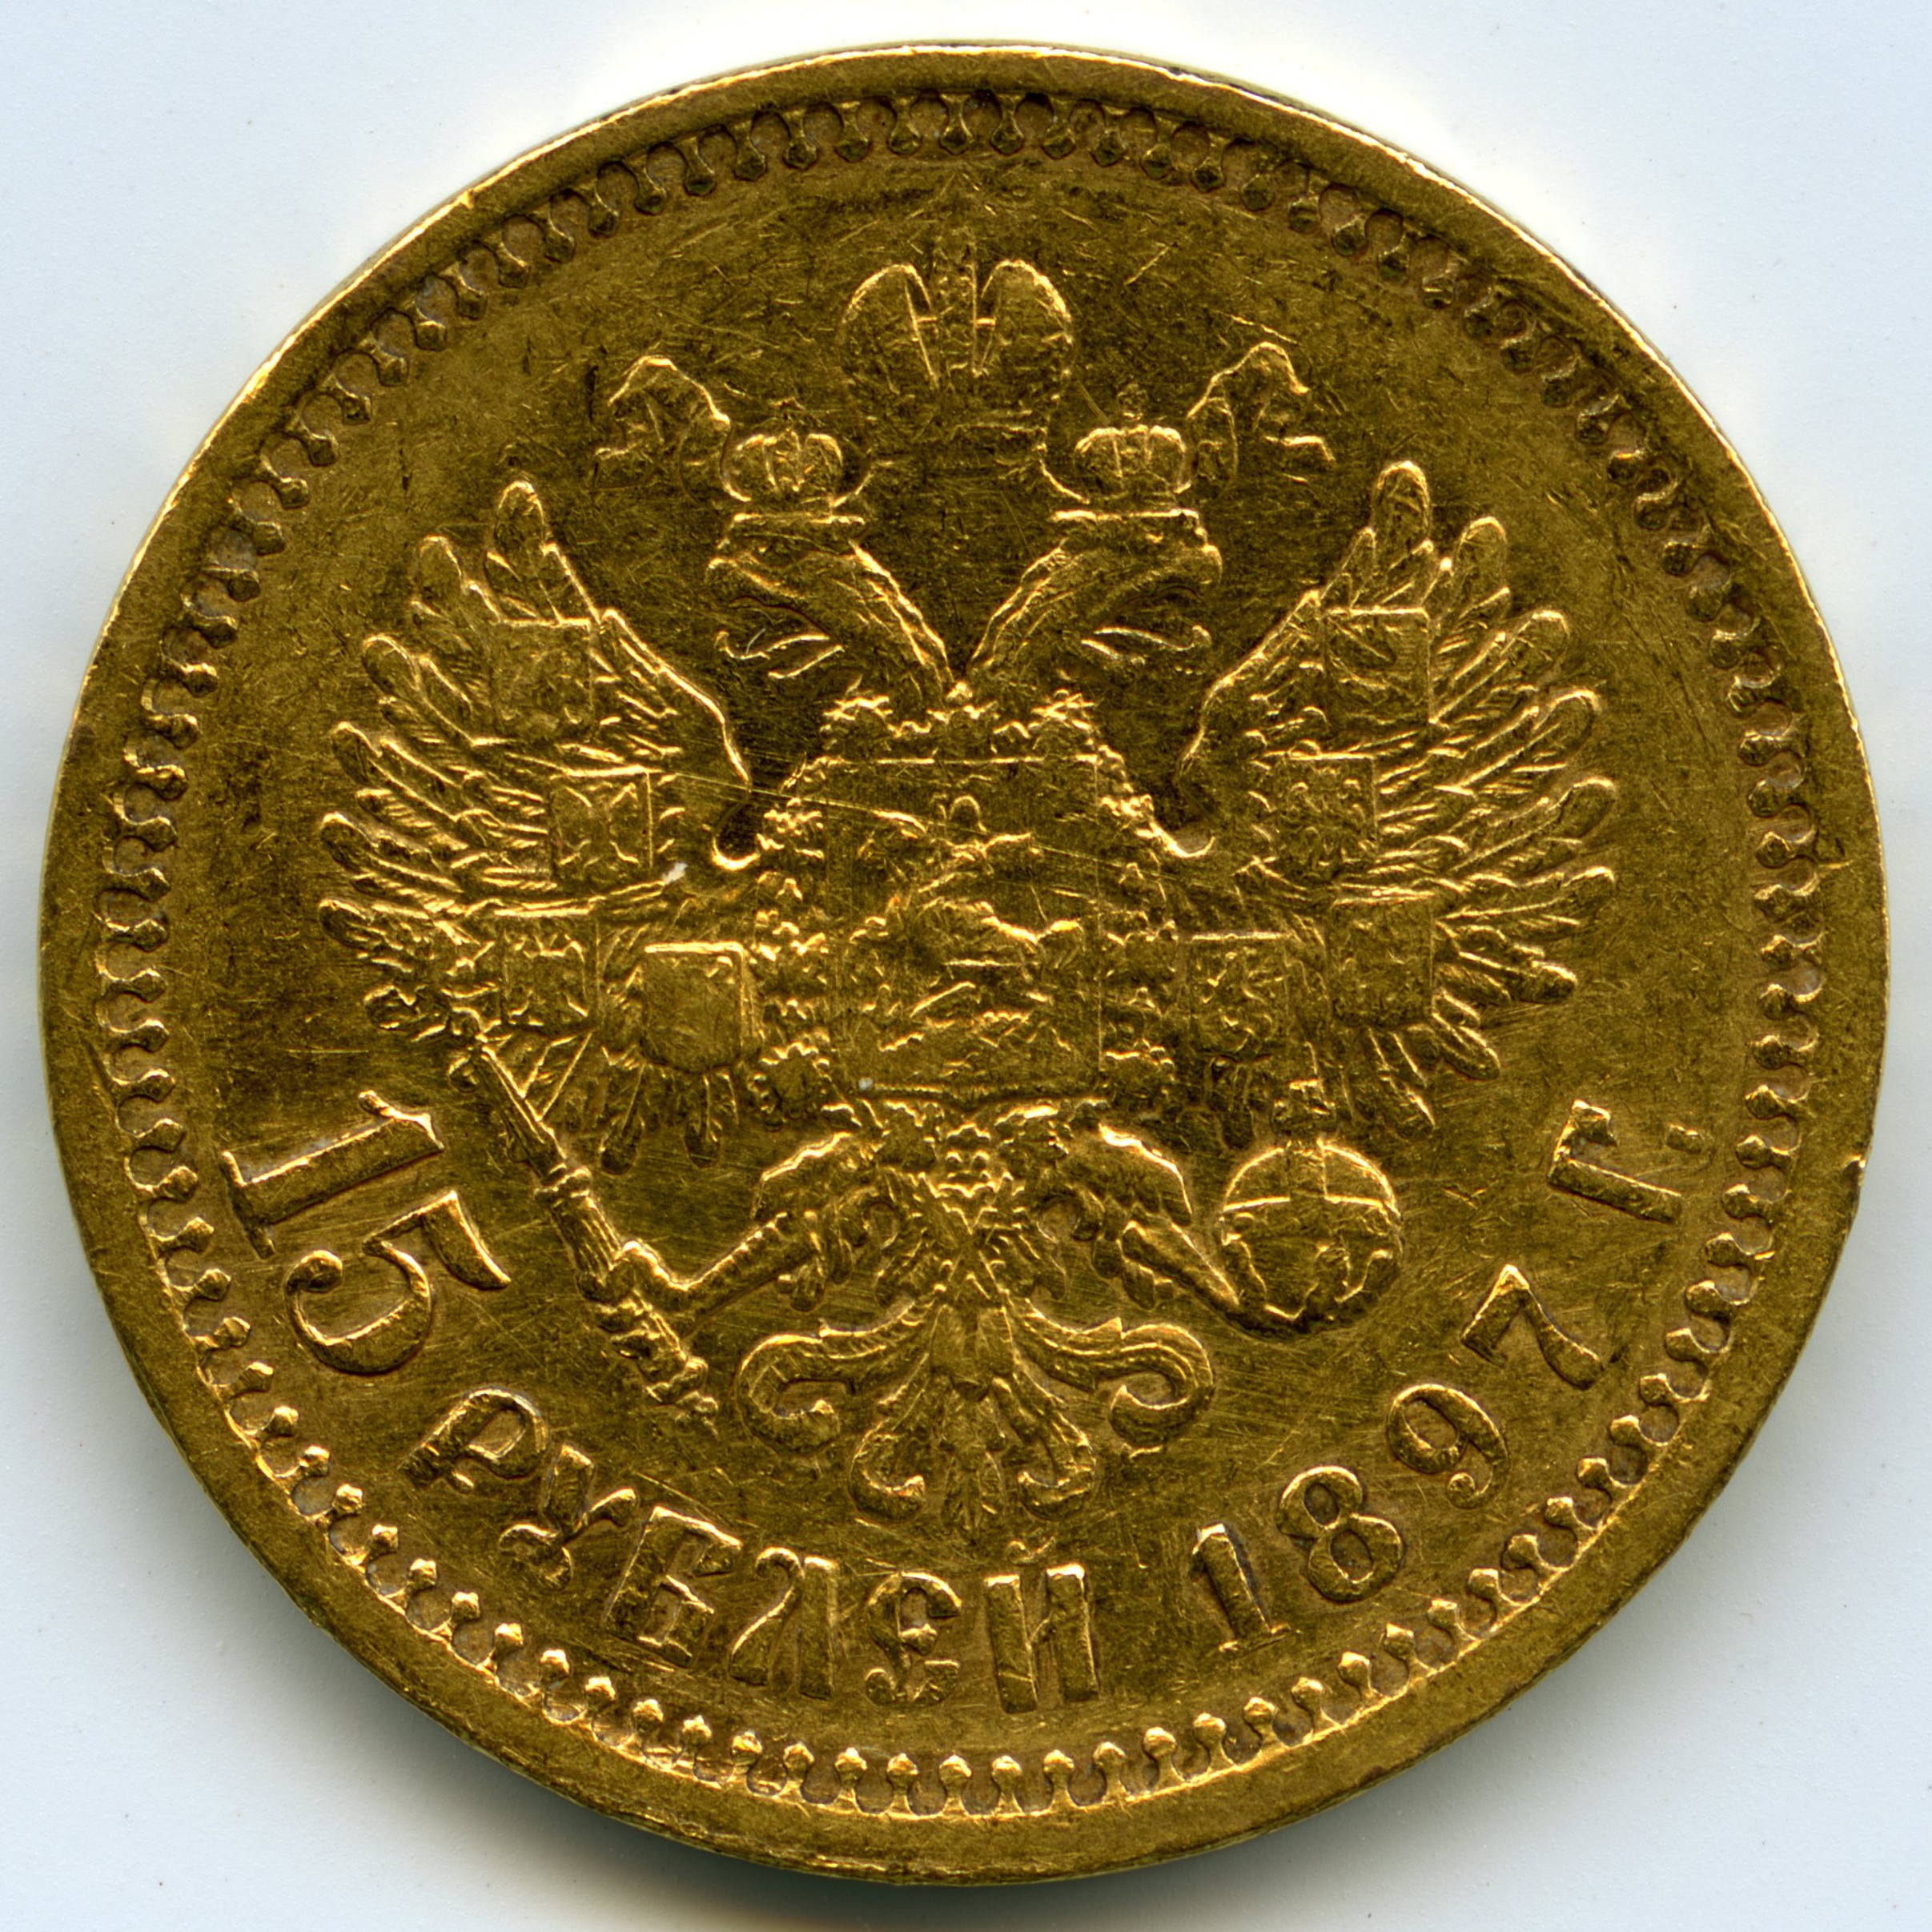 Russie - 15 Roubles - 1897 revers